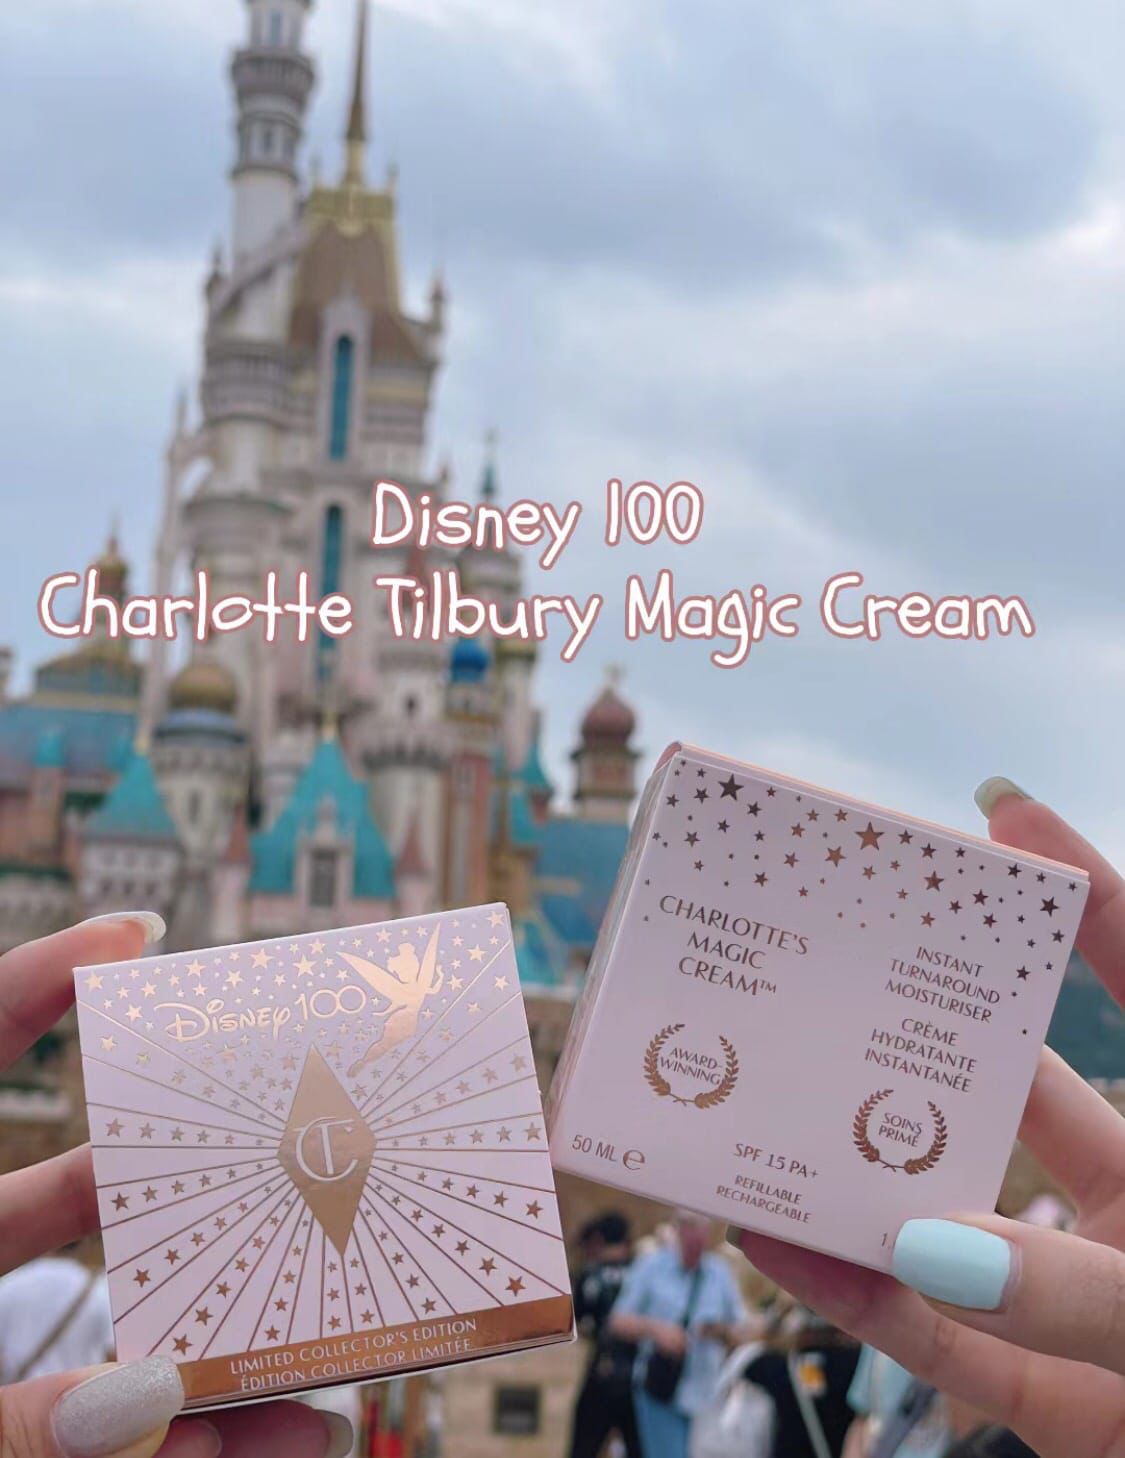 Charlotte Tilbury and Disney Release Limited-Edition Beauty Collection